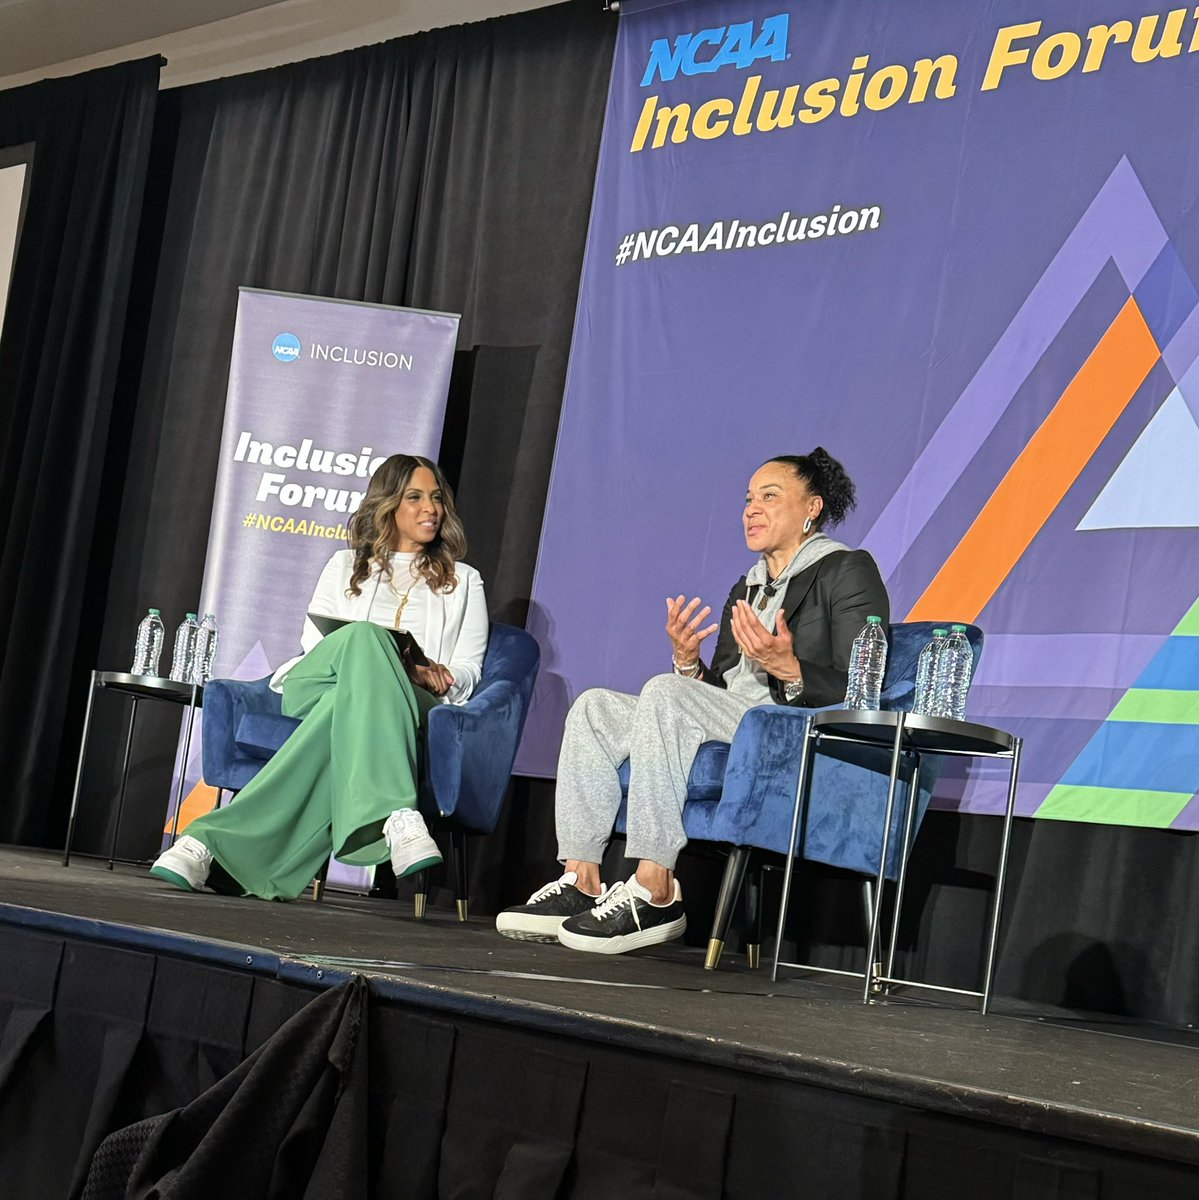 Had to pinch myself today…

Was welcomed to the stage by @LaChinaRobinson 

And then had the privilege of listening to her convo with @dawnstaley from the front row…

Life is beautiful 🫶🏽🔥🙌🏽

Indigenize the Academy 🤓🤎✊🏽

#NCAAInclusion